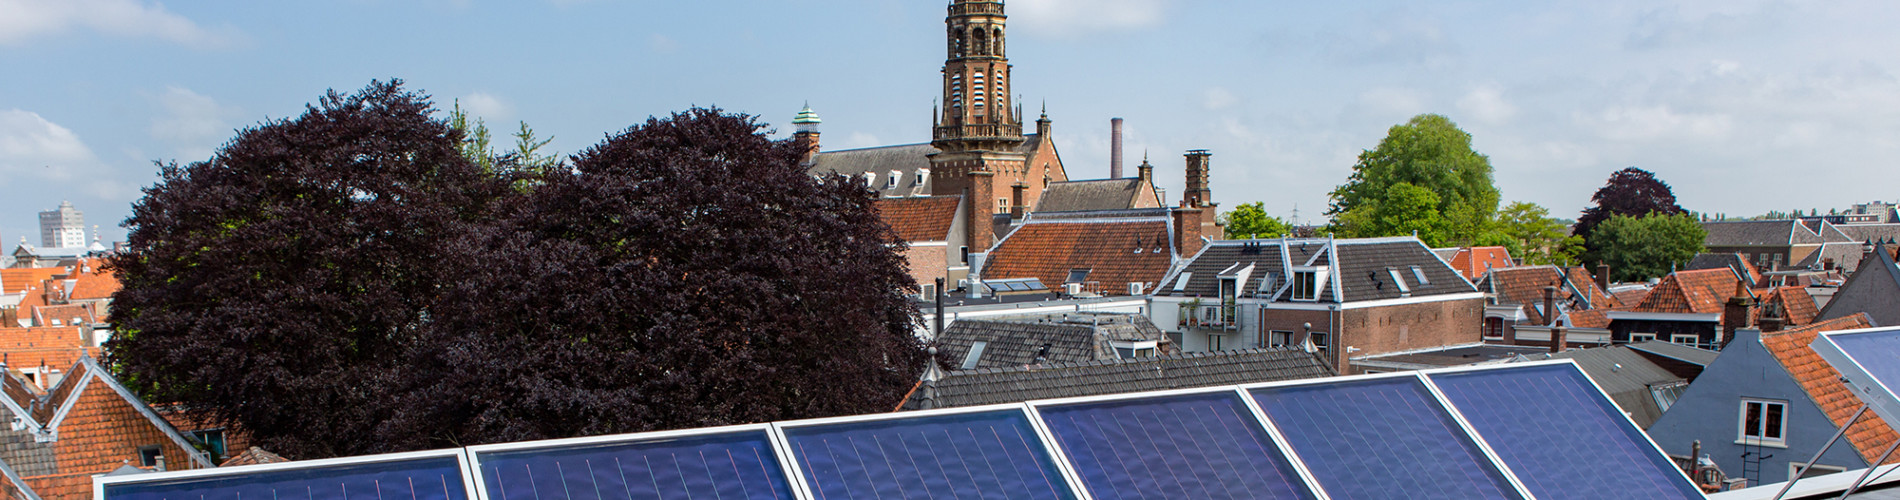 Energy with solar panels on the roof in Leiden.